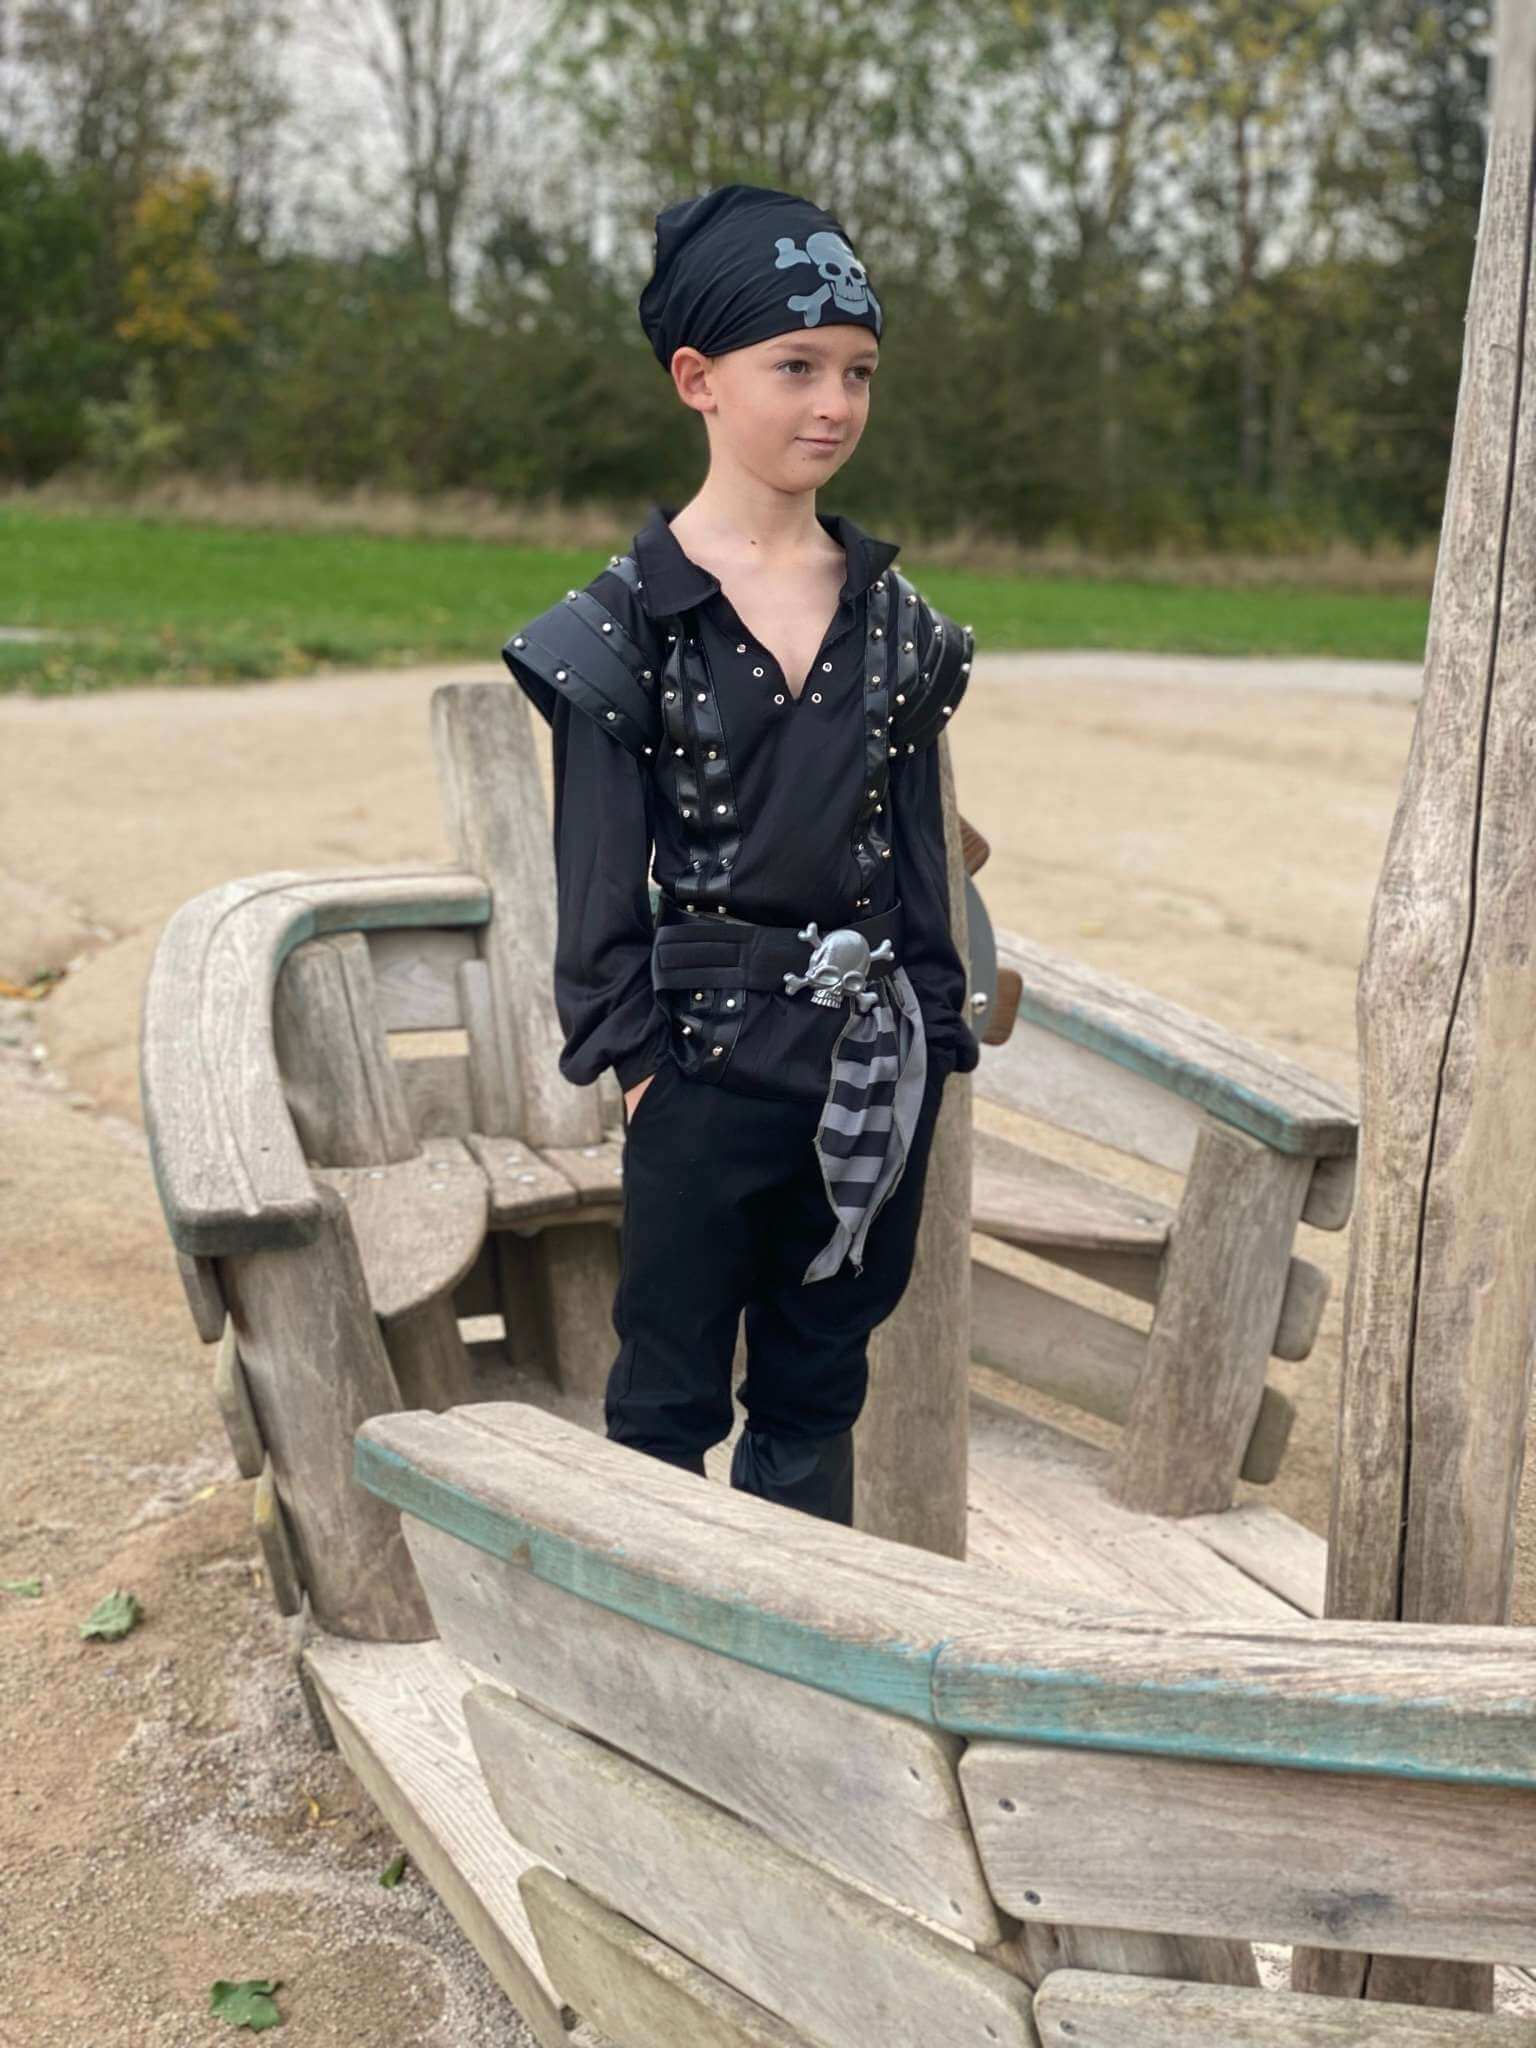 Boy stood on a boat wearing a black pirate costume with studs on the top, a belt, boot covers and a bandana.